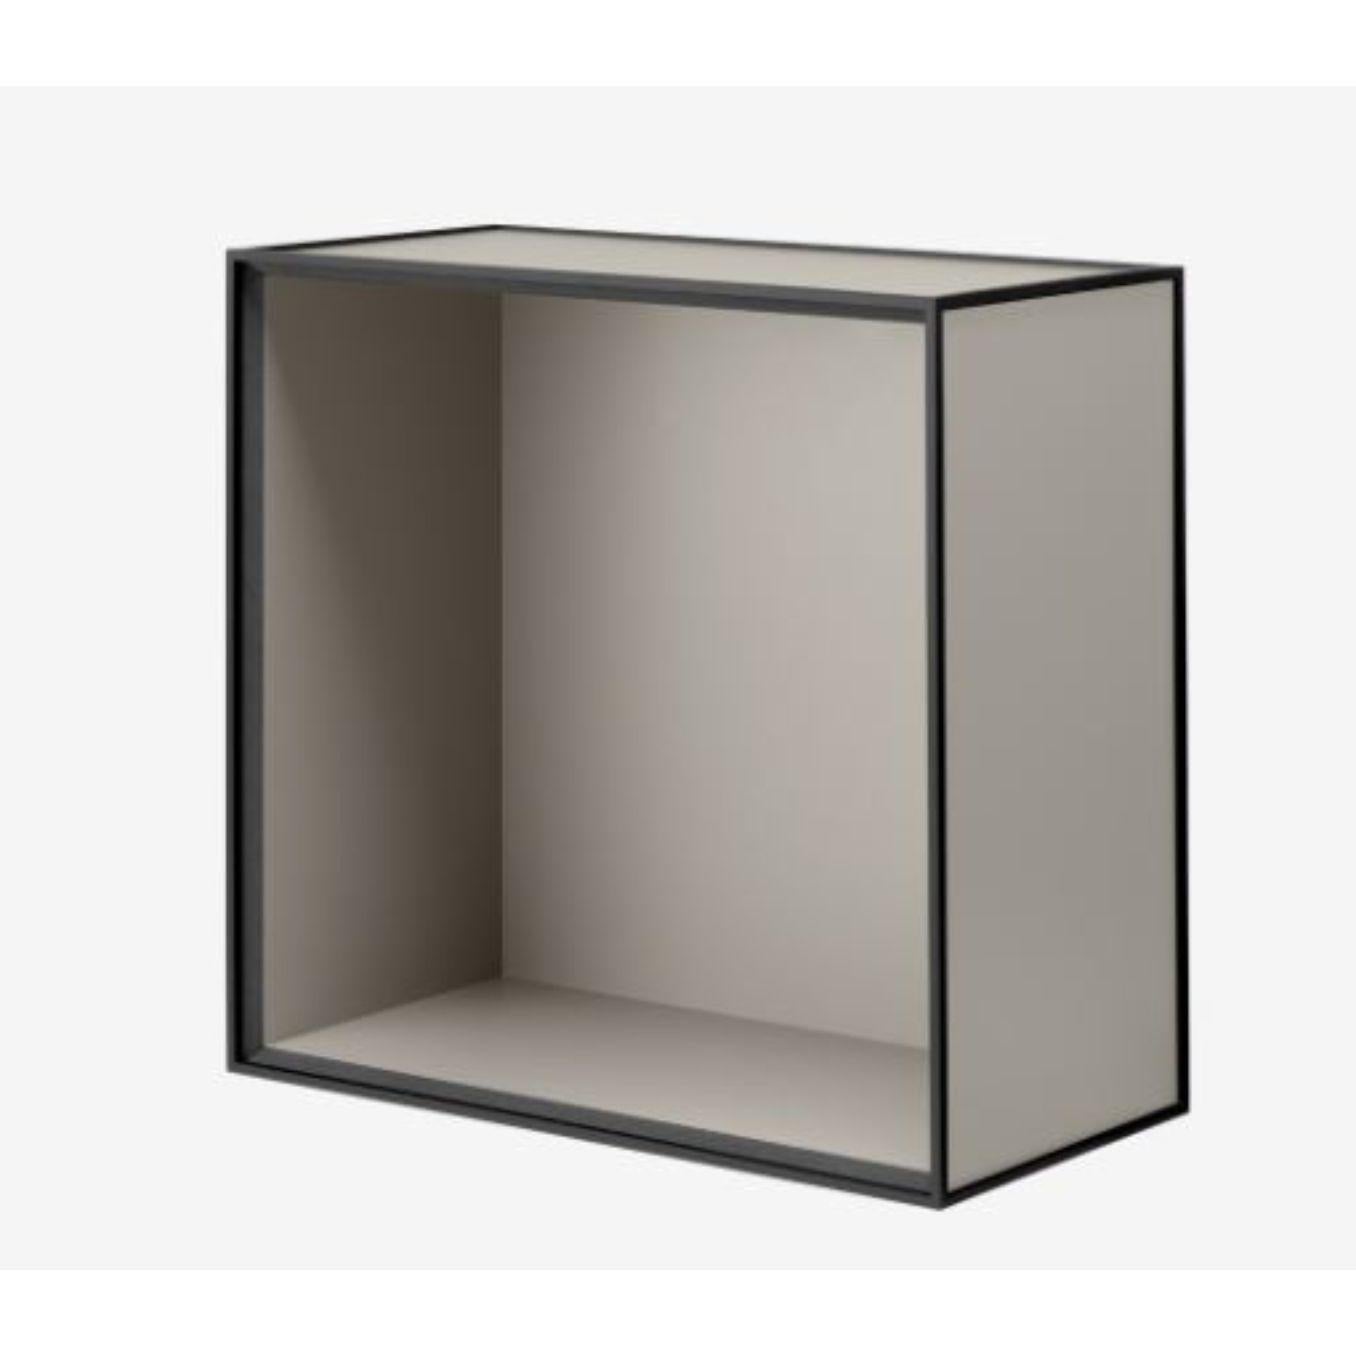 42 Fjord frame box by Lassen
Dimensions: D 42 x W 21 x H 42 cm 
Materials: Finér, Melamin, Melamin, Melamine, Metal, Veneer
Also available in different colours and dimensions. 
Weight: 10.5 Kg


By Lassen is a Danish design brand focused on